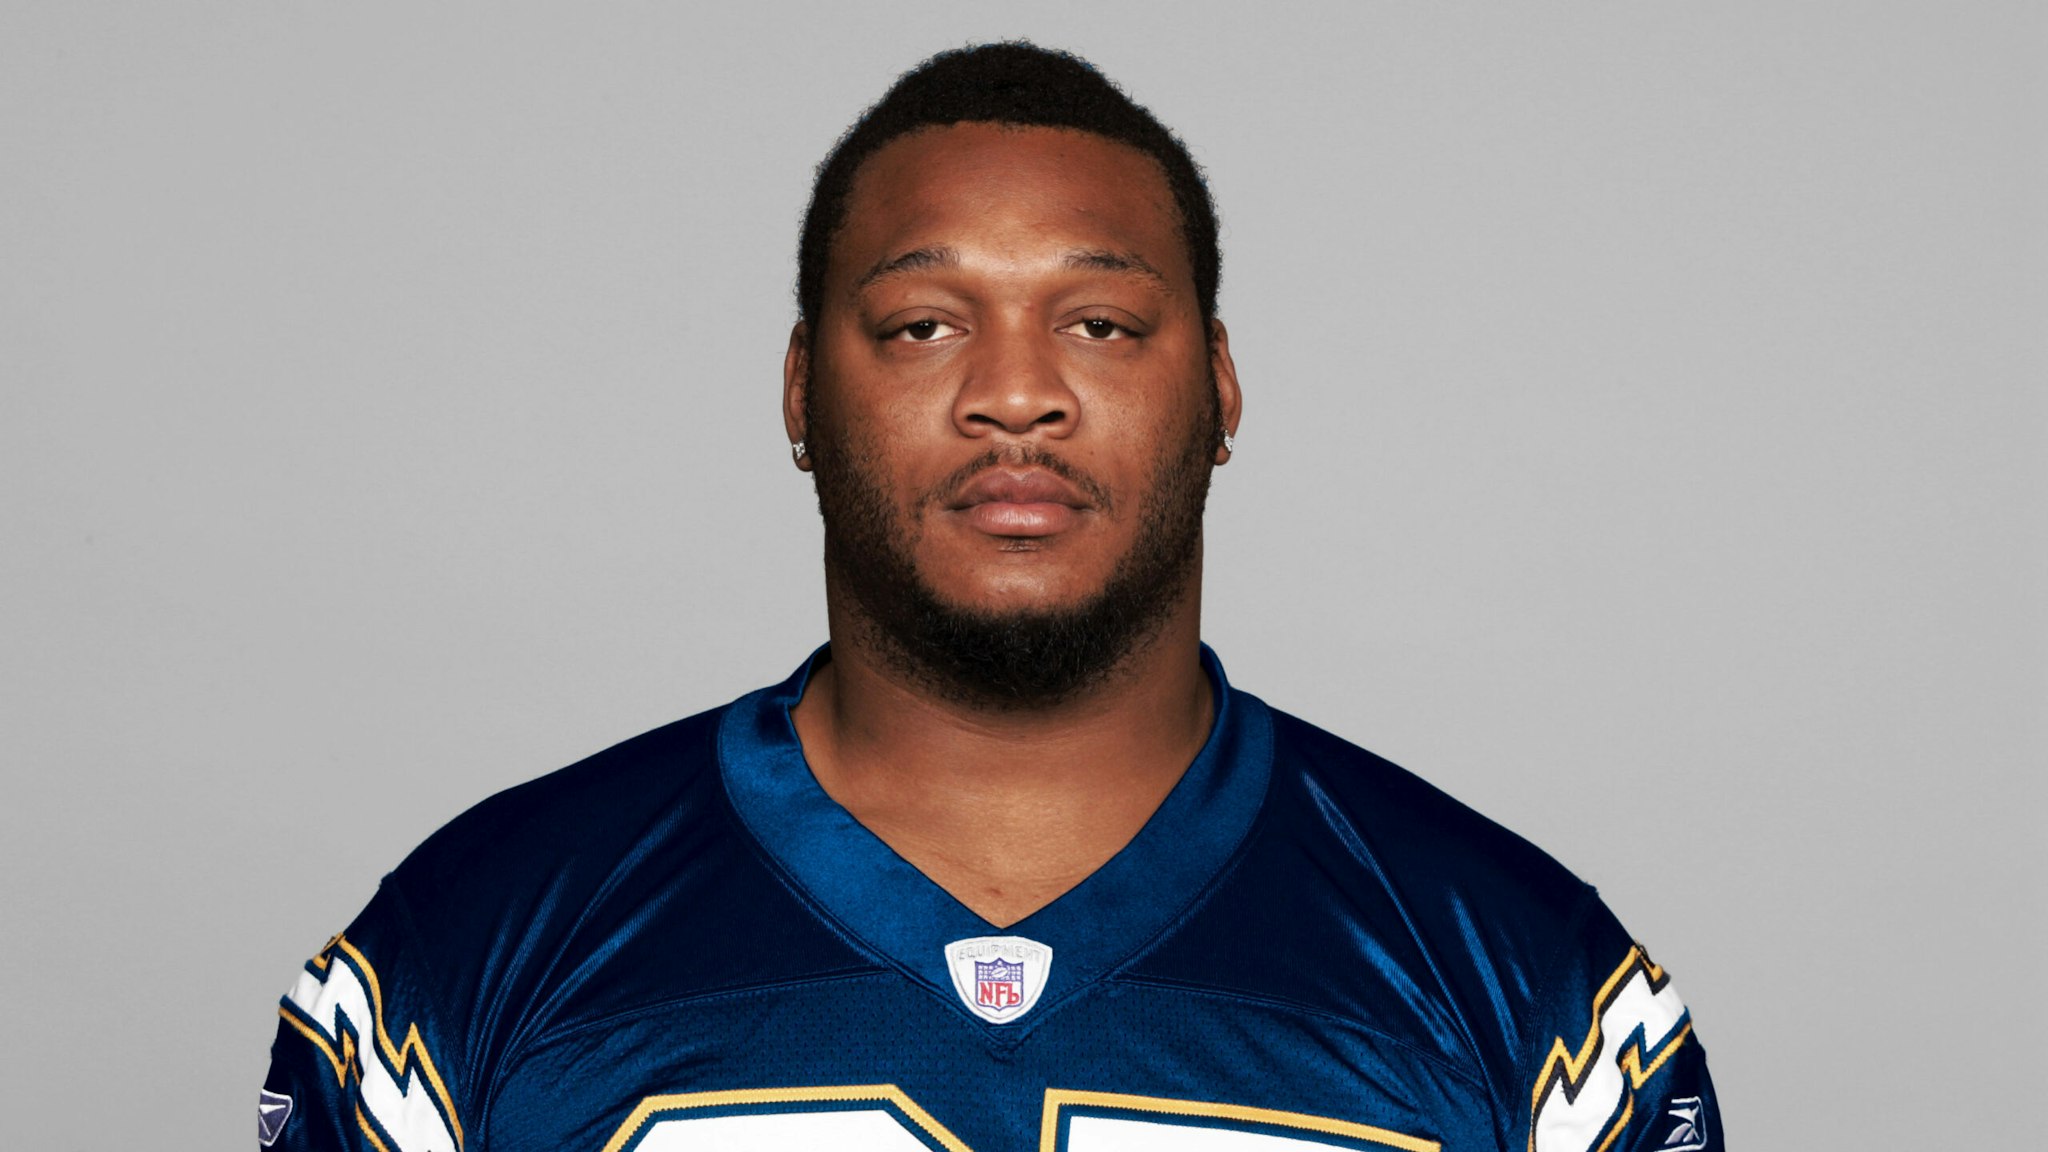 SAN DIEGO - 2005: Adrian Dingle of the San Diego Chargers poses for his 2005 NFL headshot at photo day in San Diego, California.